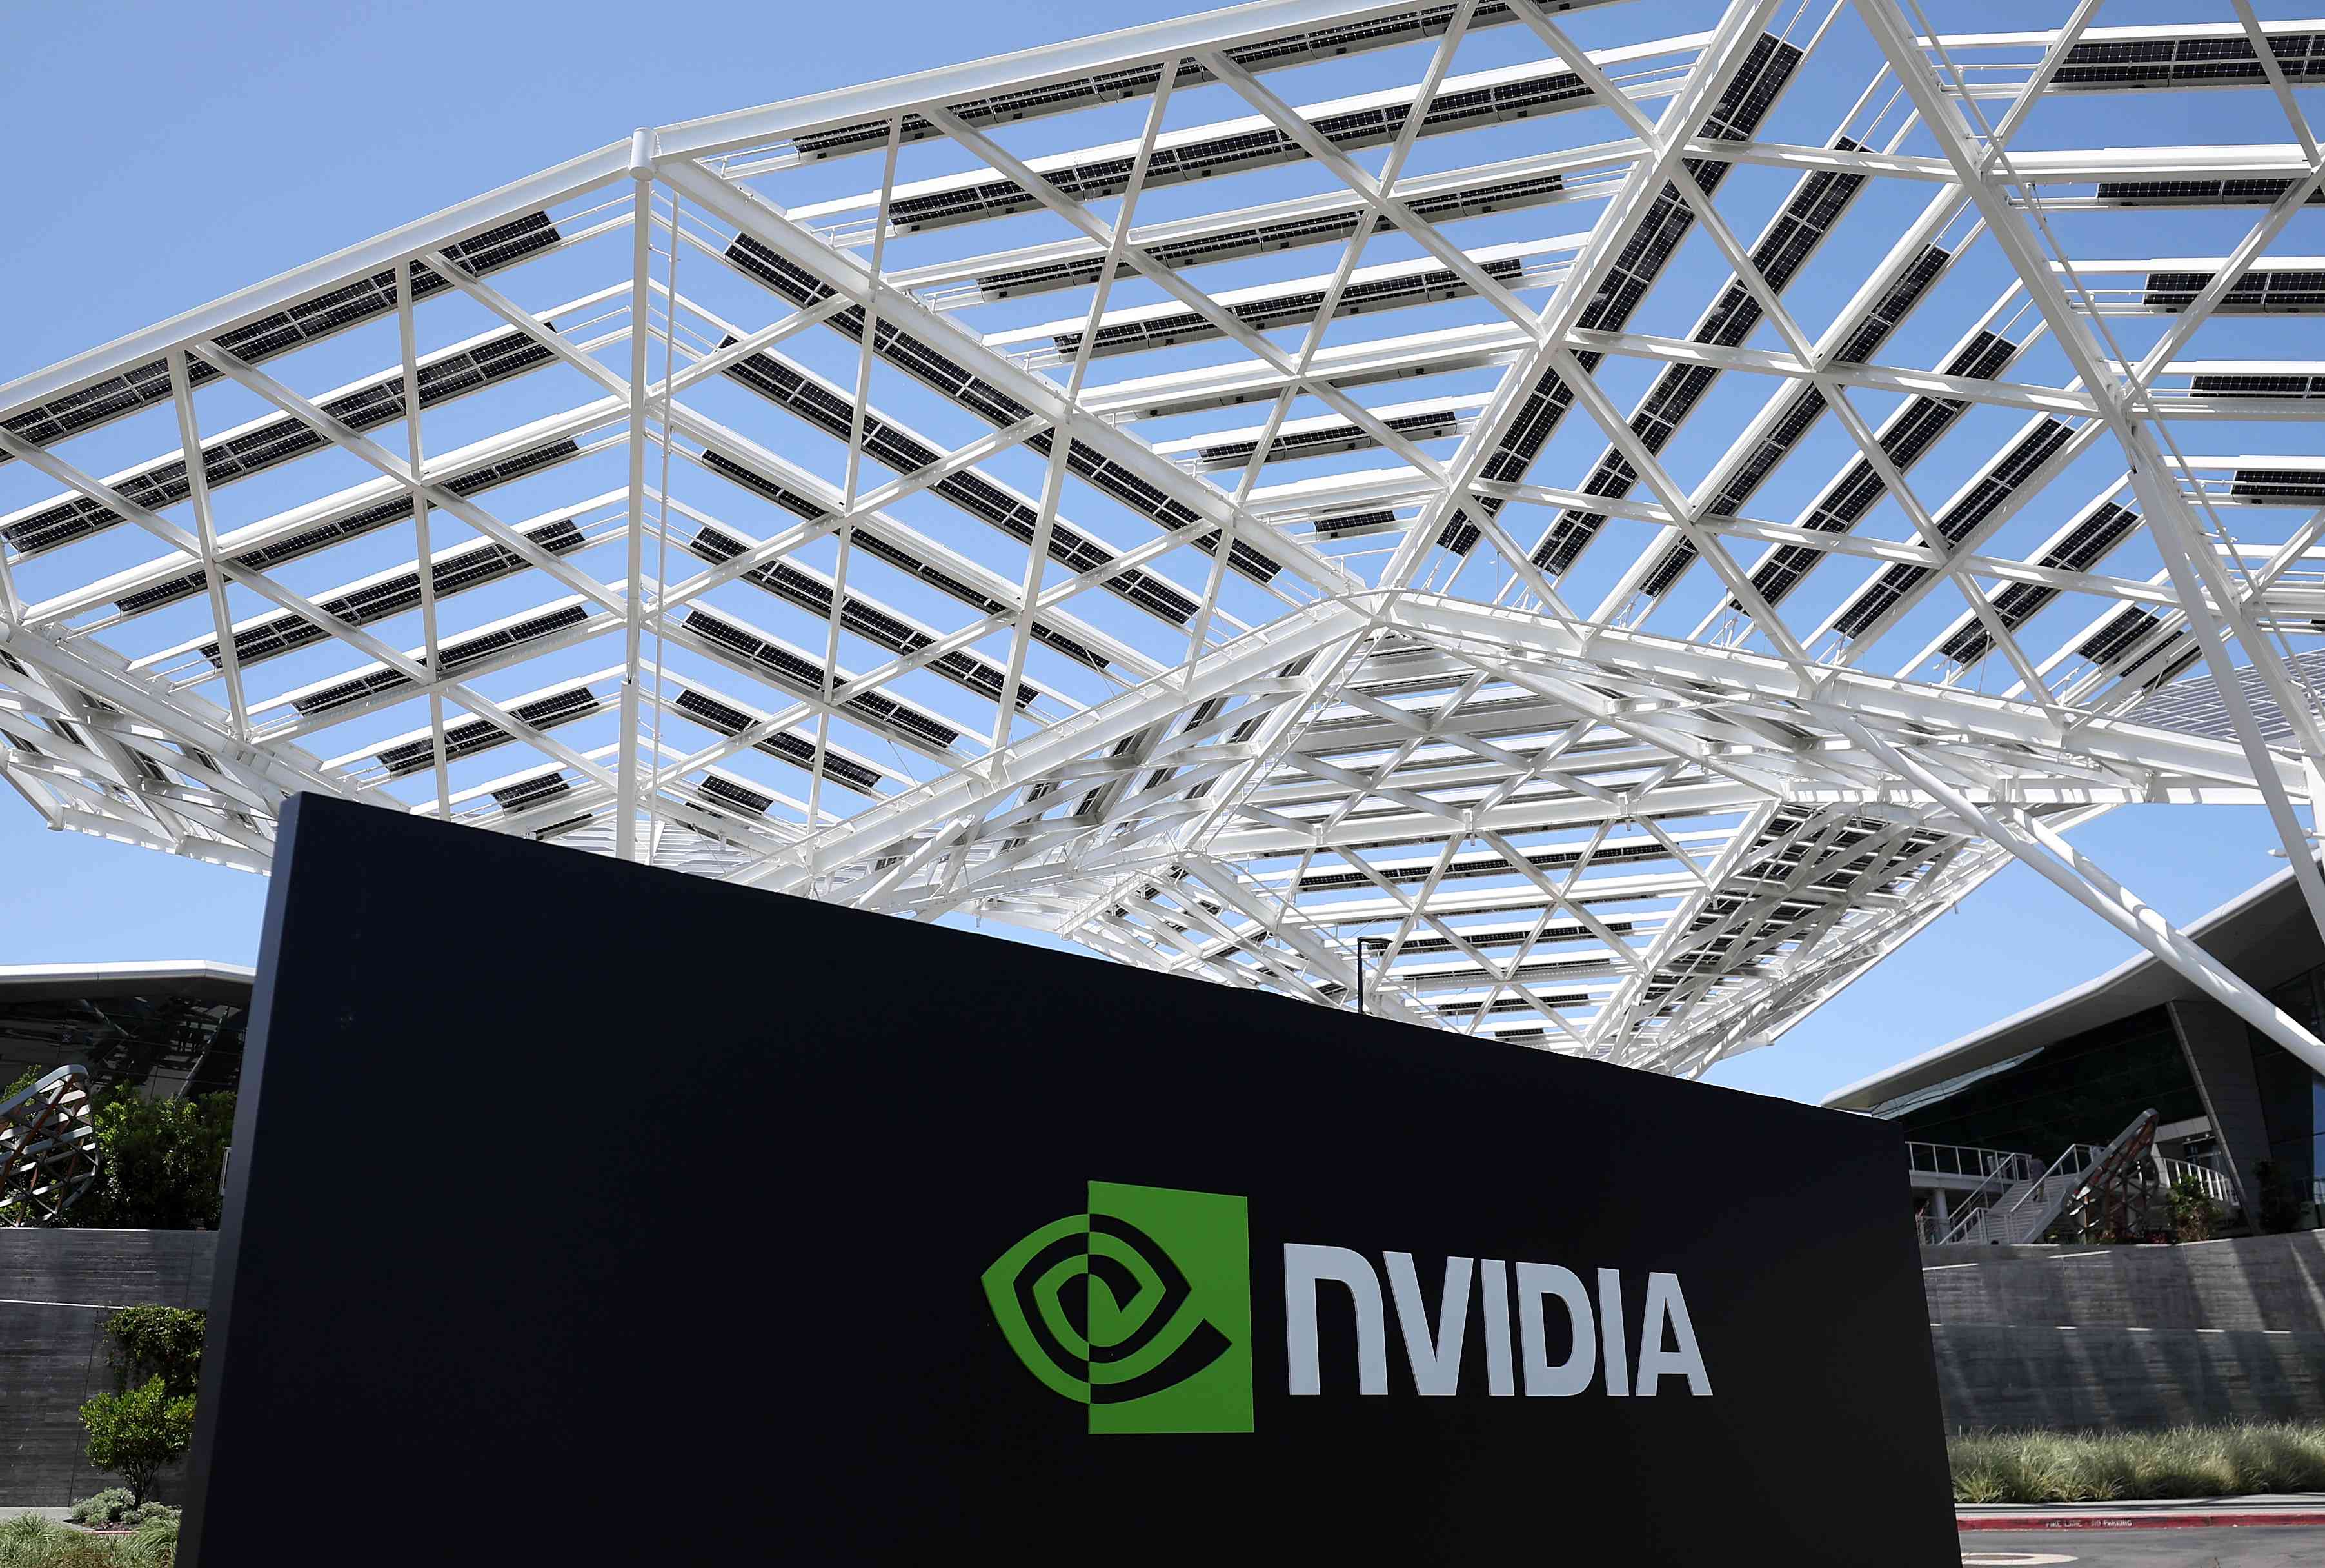 Nvidia Stock Rises Monday, Helping Fuel S&P 500 and Nasdaq Gains—Here's Why